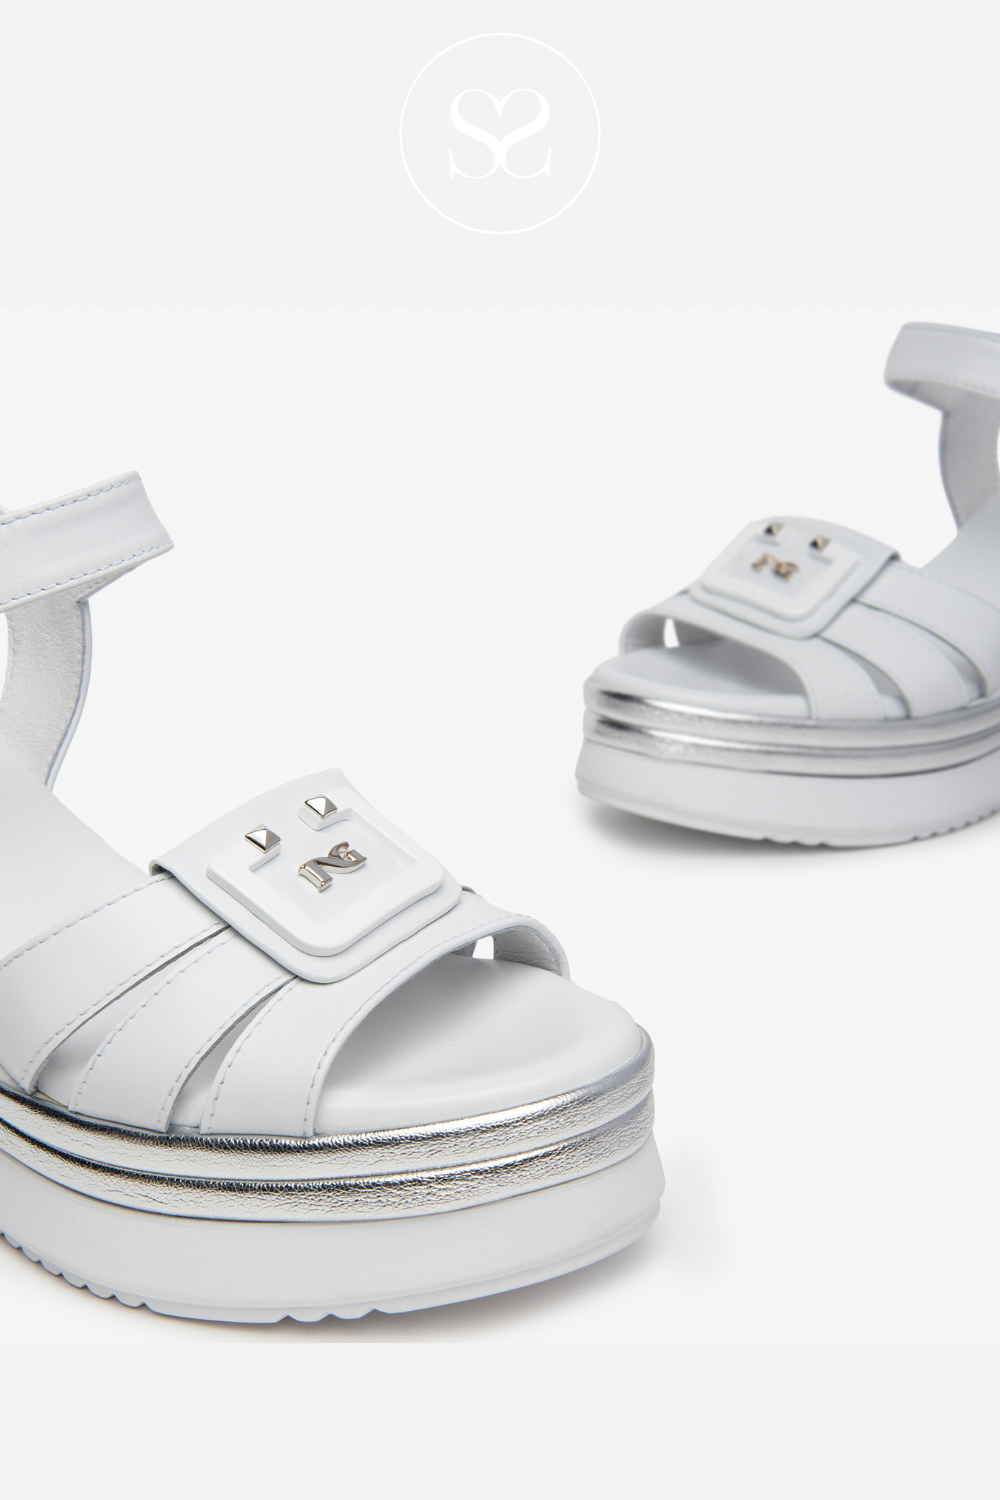 buckle detail on white sandals from NeroGiardini Ireland